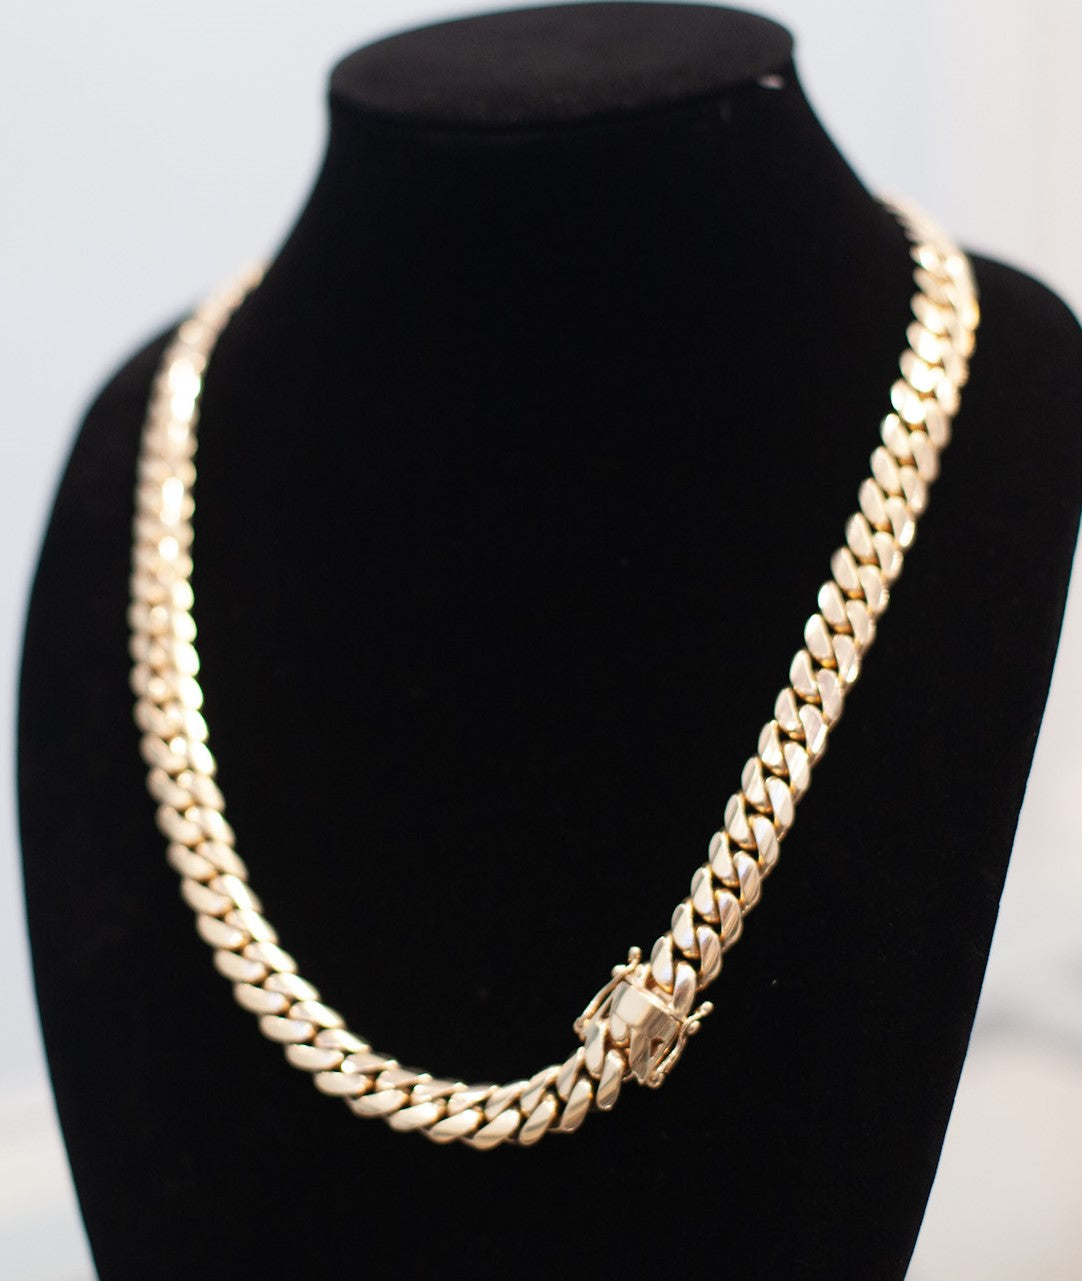 SOLID MIAMI 14K YELLOW GOLD NECKLACE